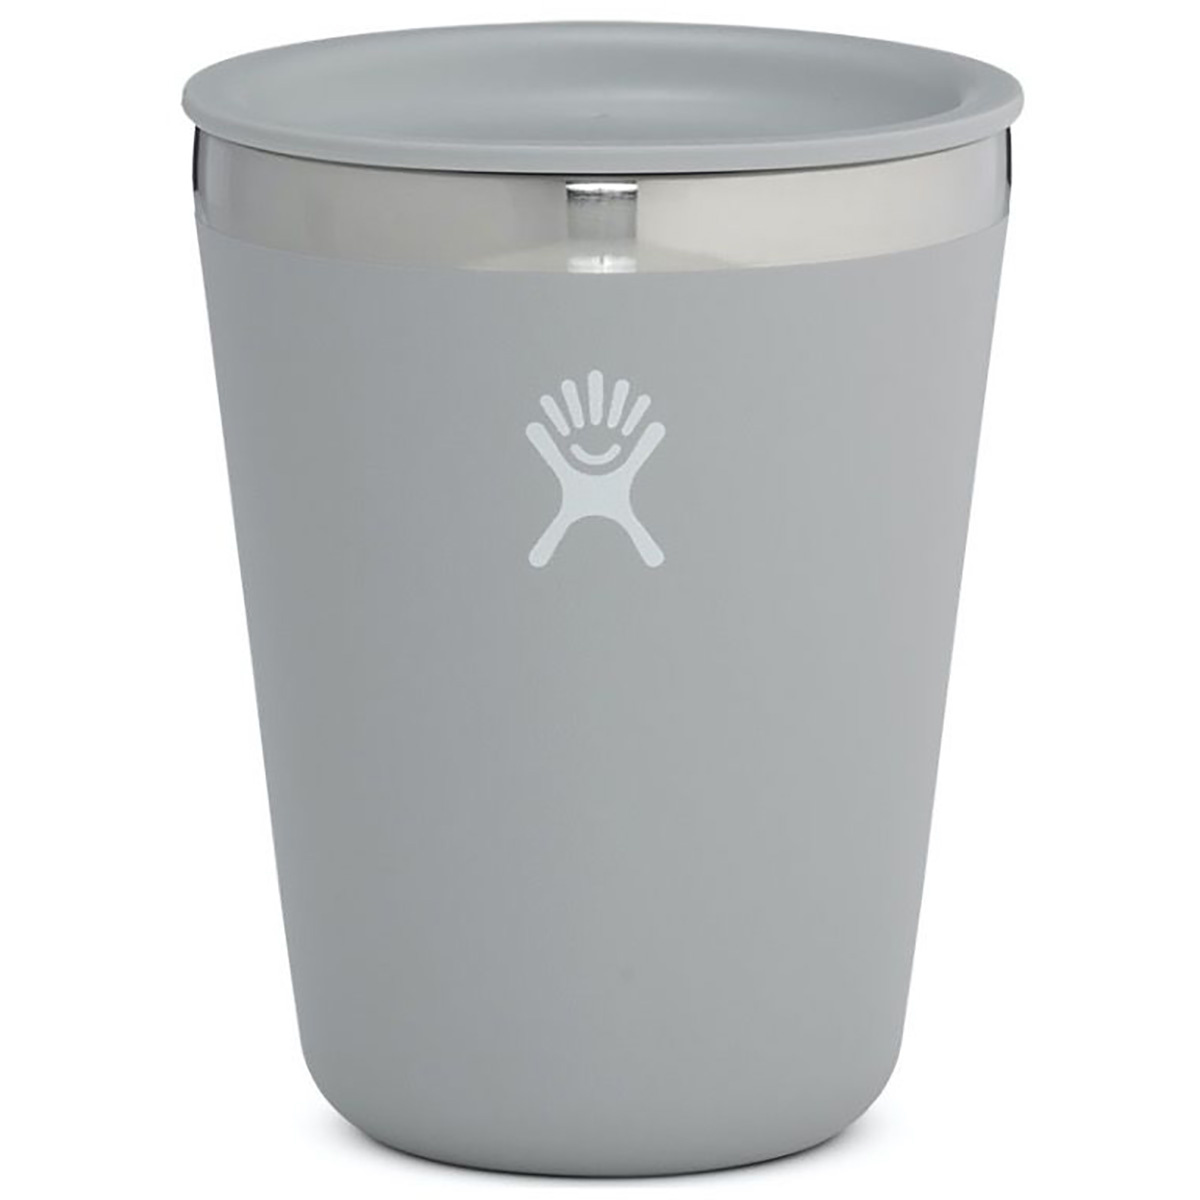 Image of Hydro Flask Tazza 12 Oz Outdoor